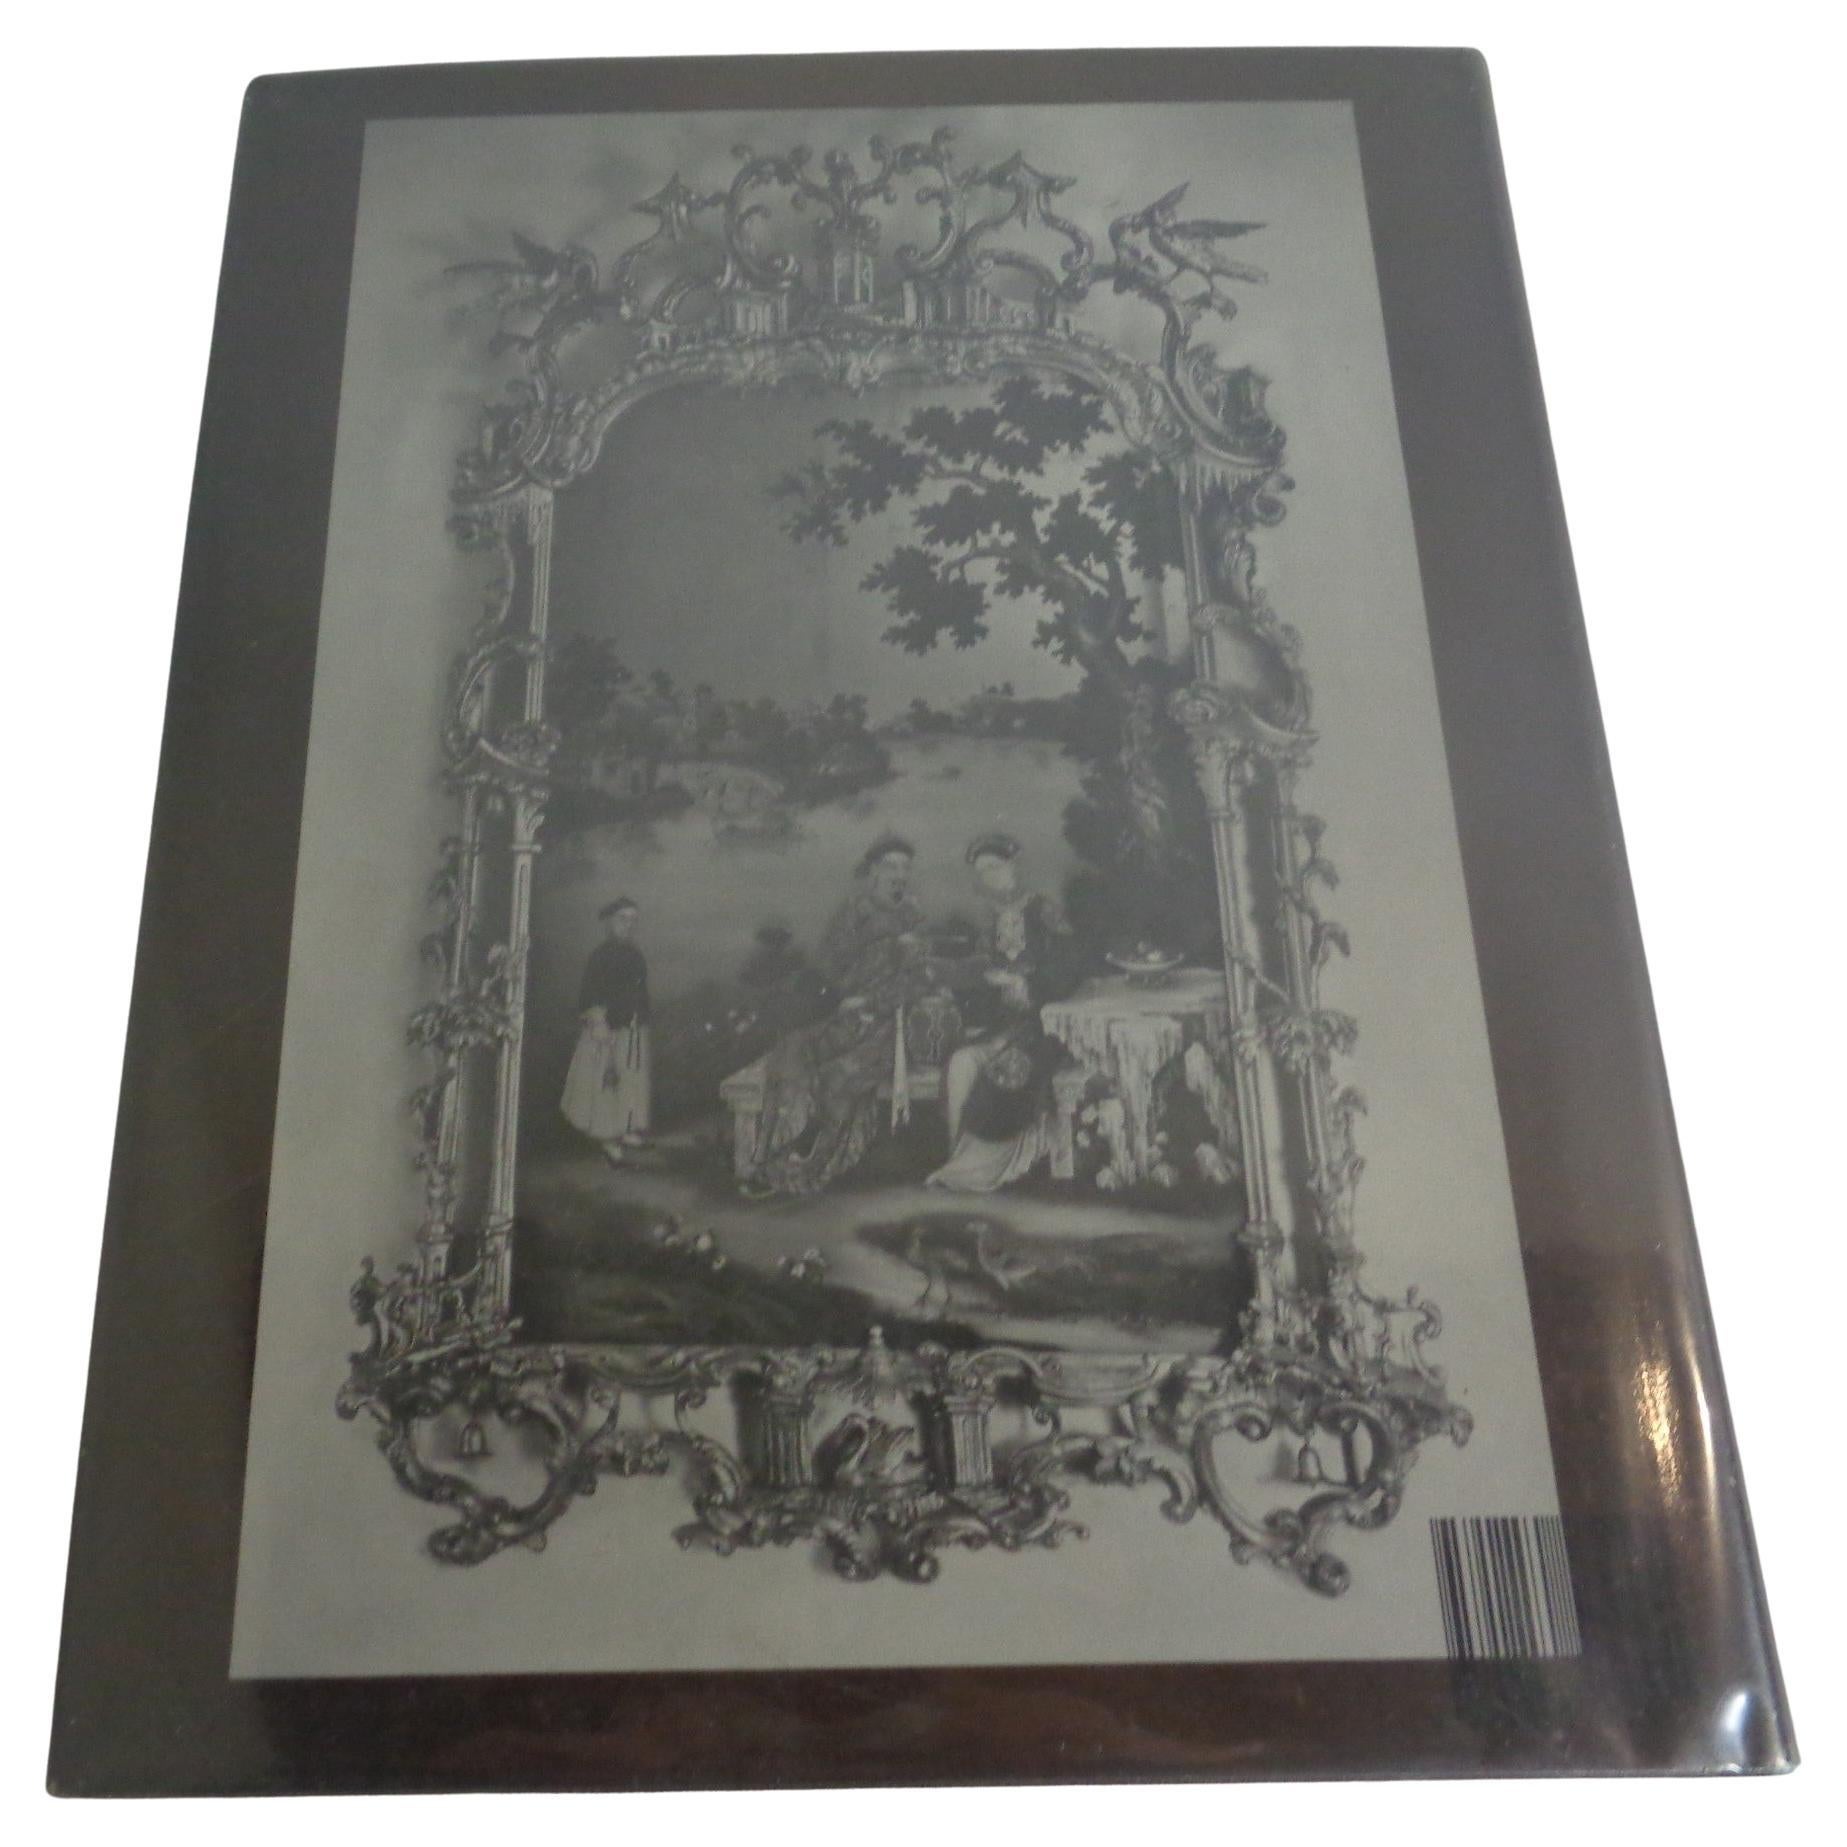 Queen Anne & Georgian Looking Glasses - Hinckley - 1990 Tauris - 1st Edition For Sale 11